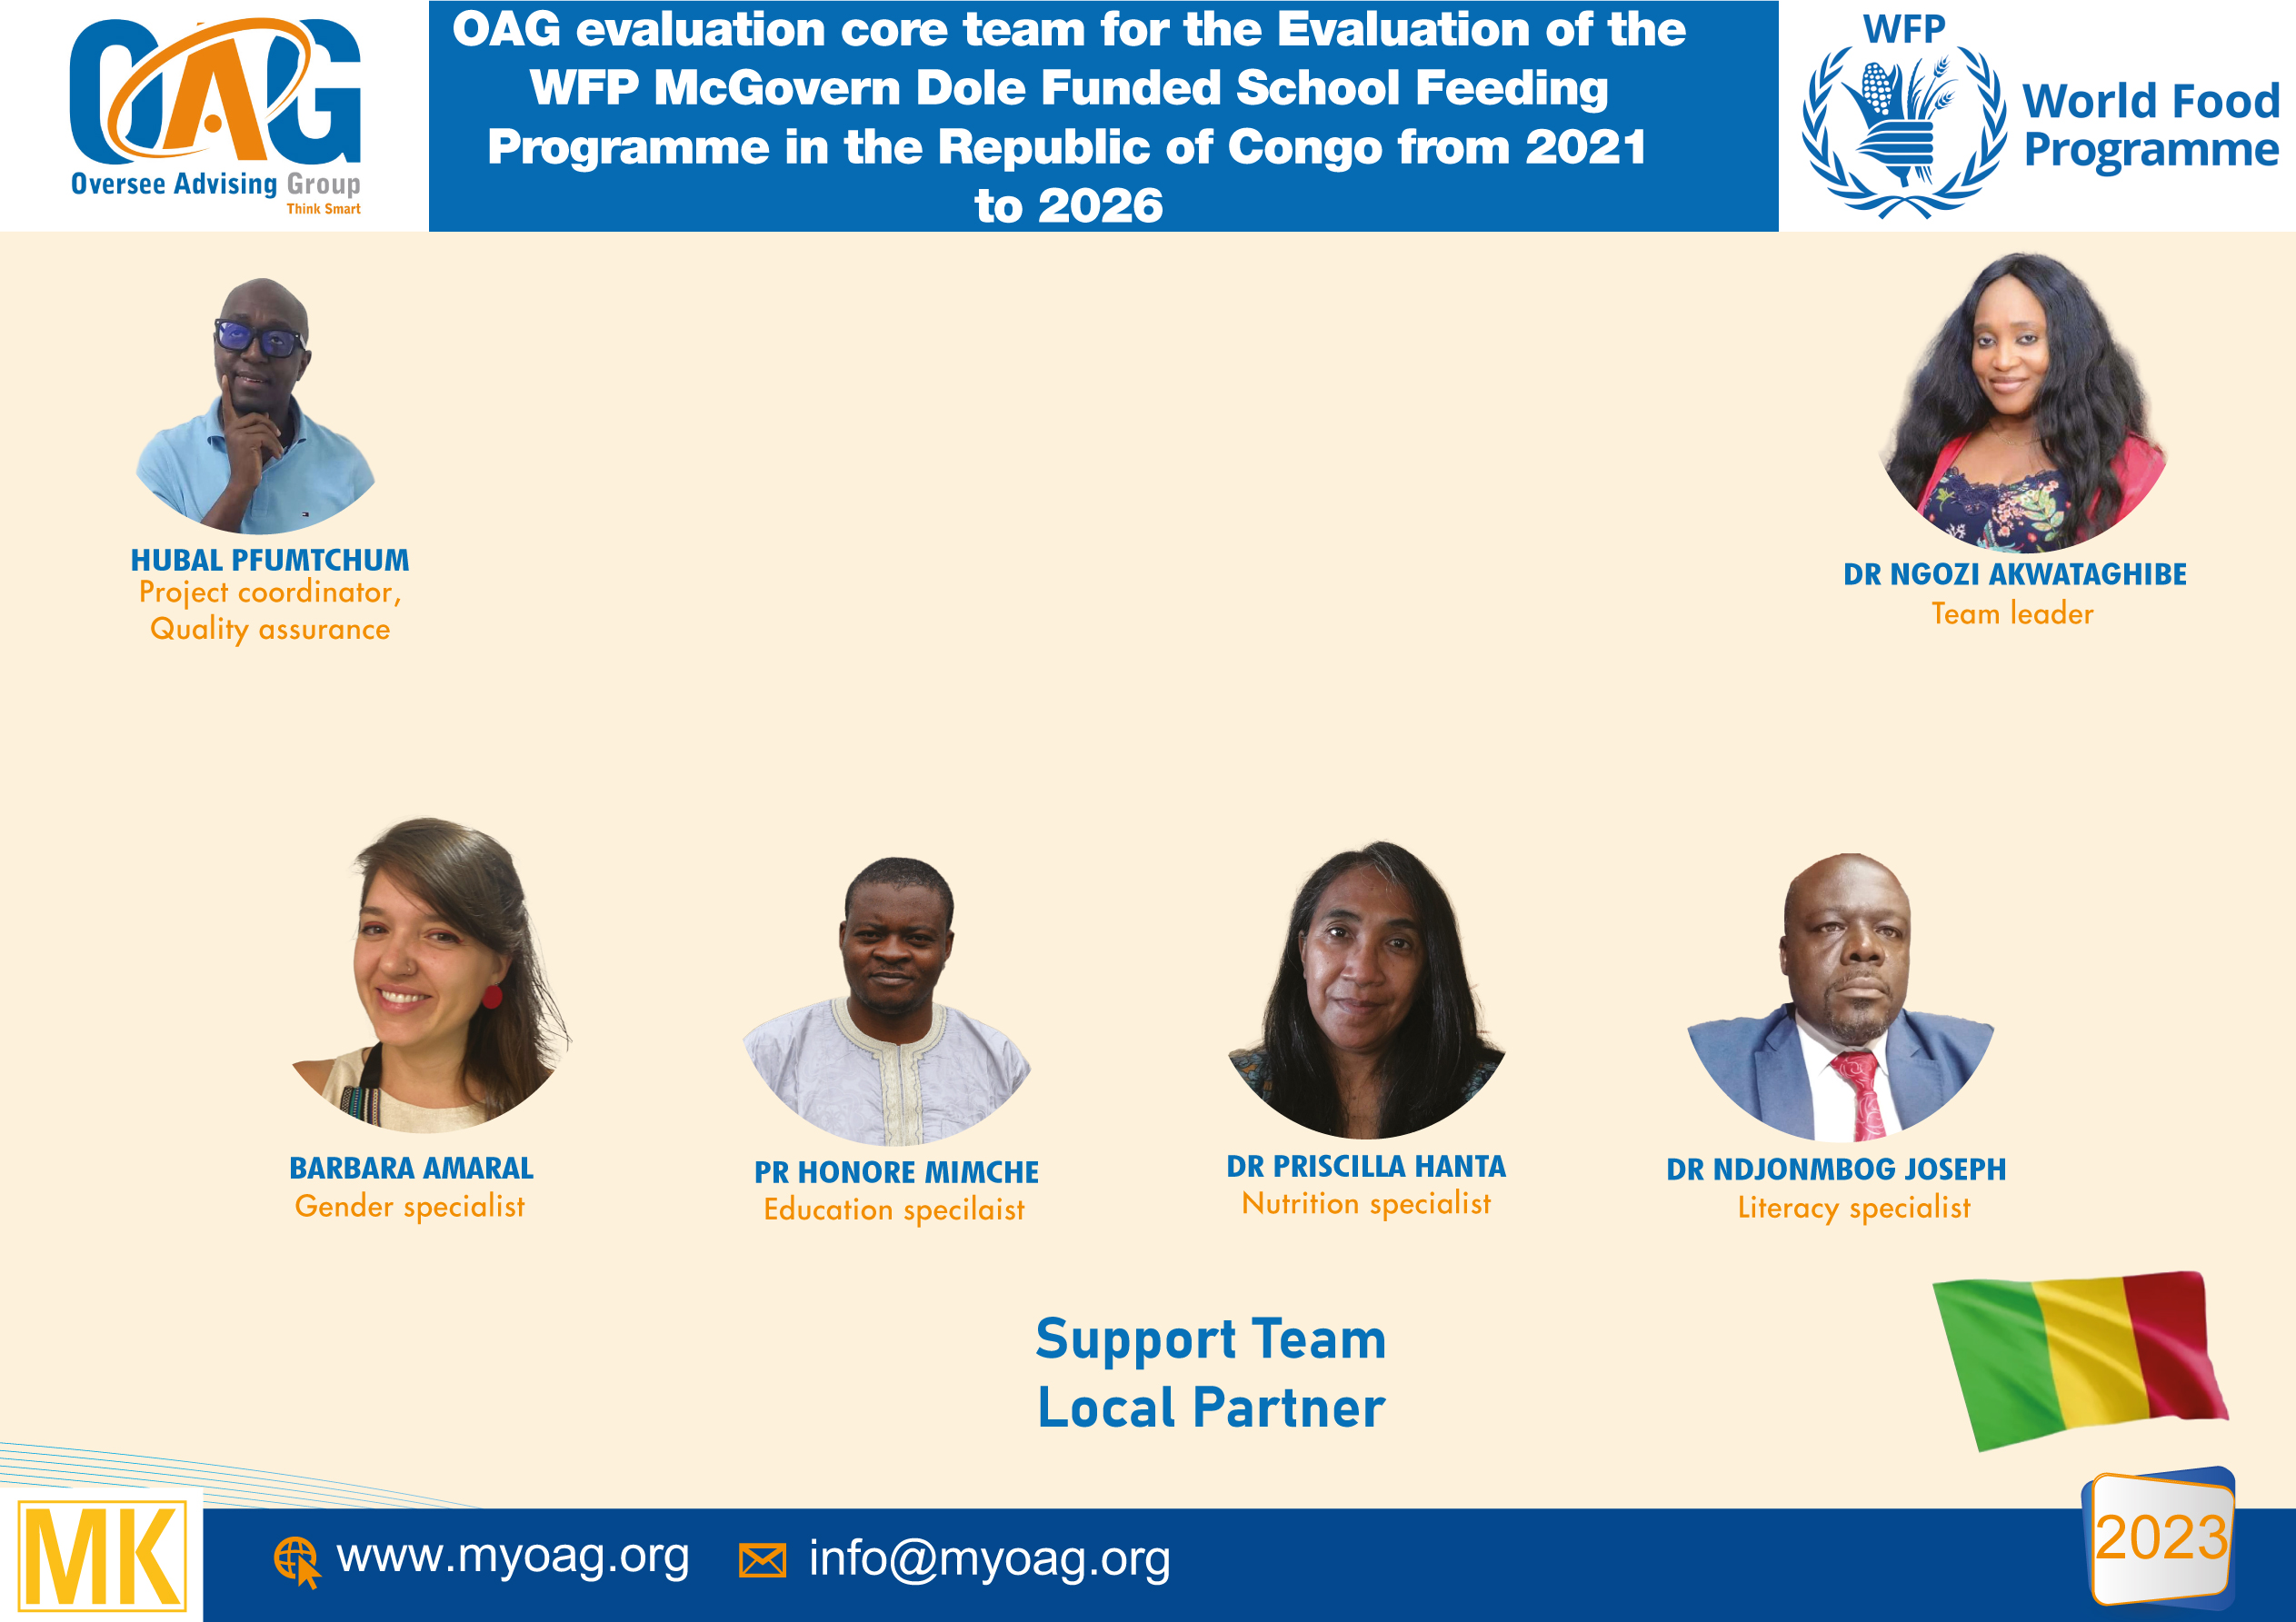 Smile to OAG team for the Baseline Evaluation of the WFP McGovern Dole Funded School Feeding Program in the Republic of Congo from 2021 to 2026